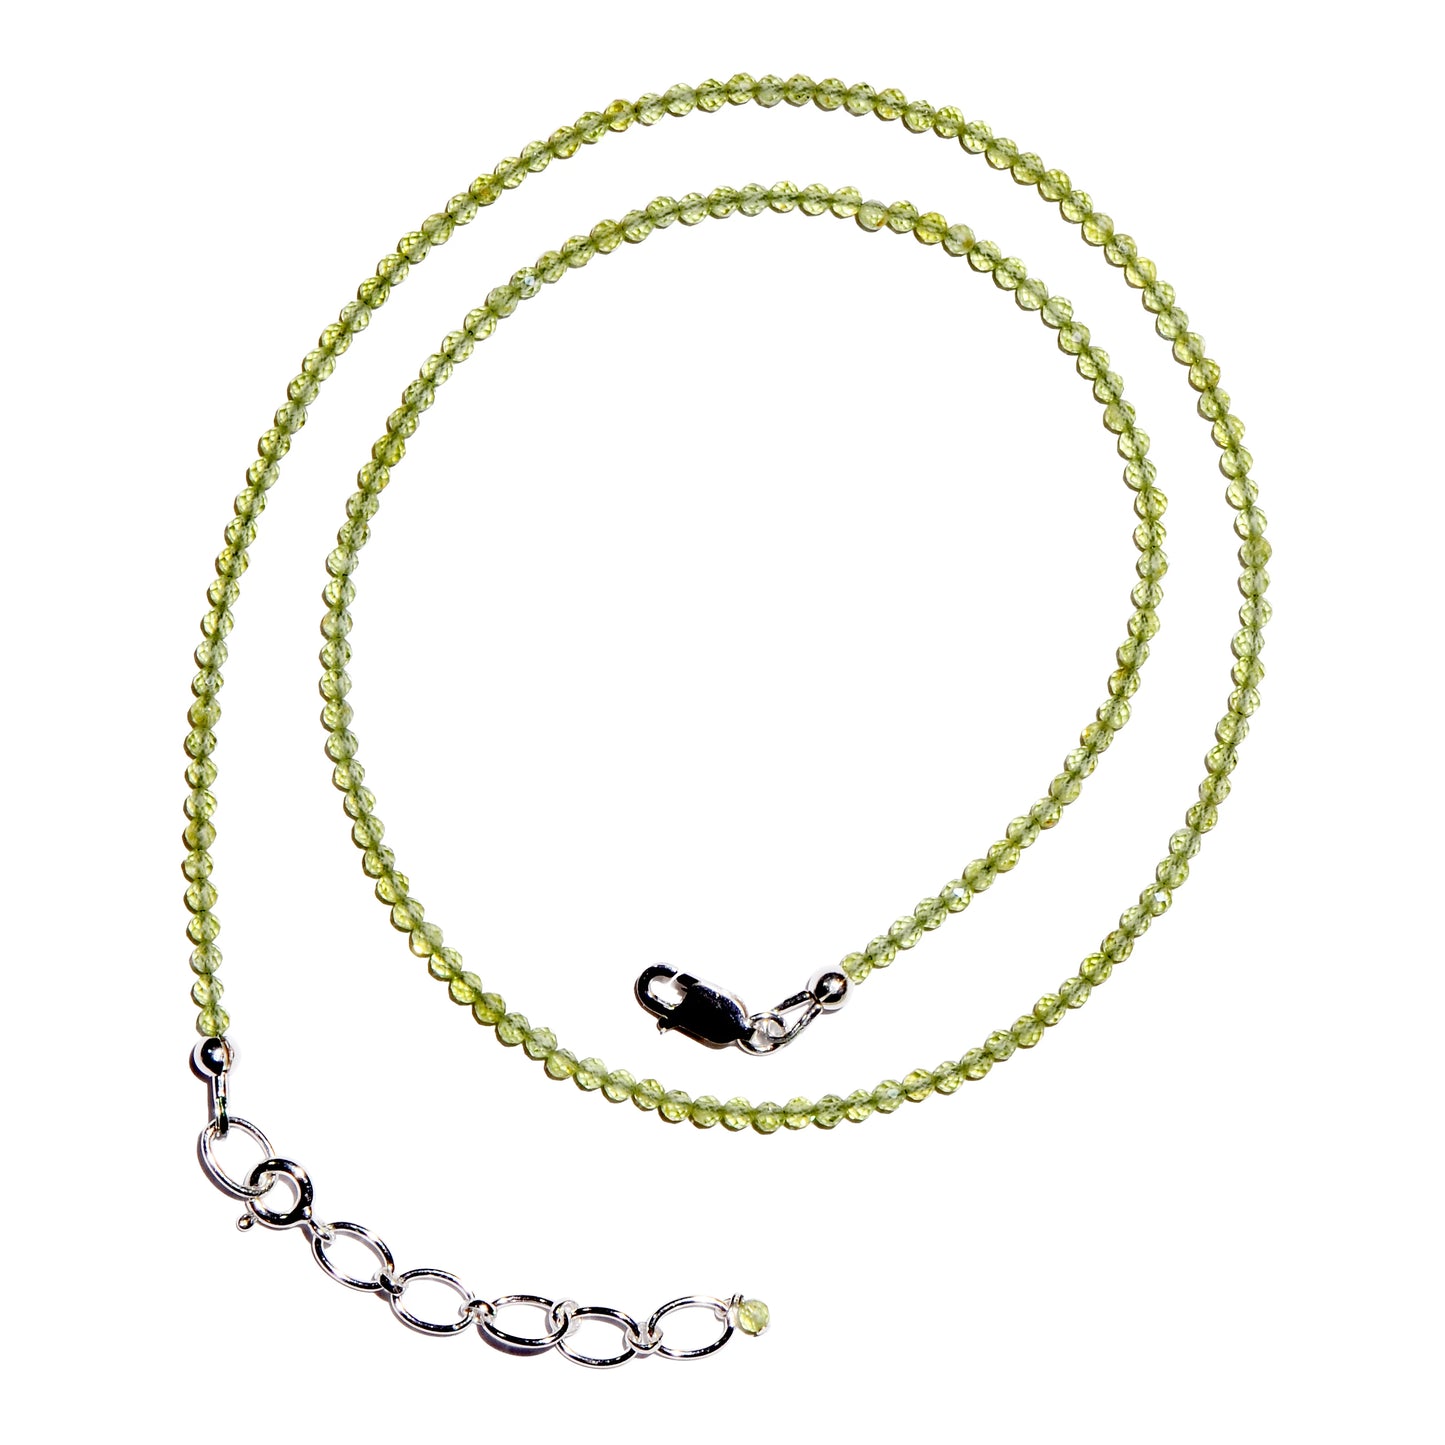 Buy Peridot Faceted Microbead Necklace 2.5mm for harmonious love.